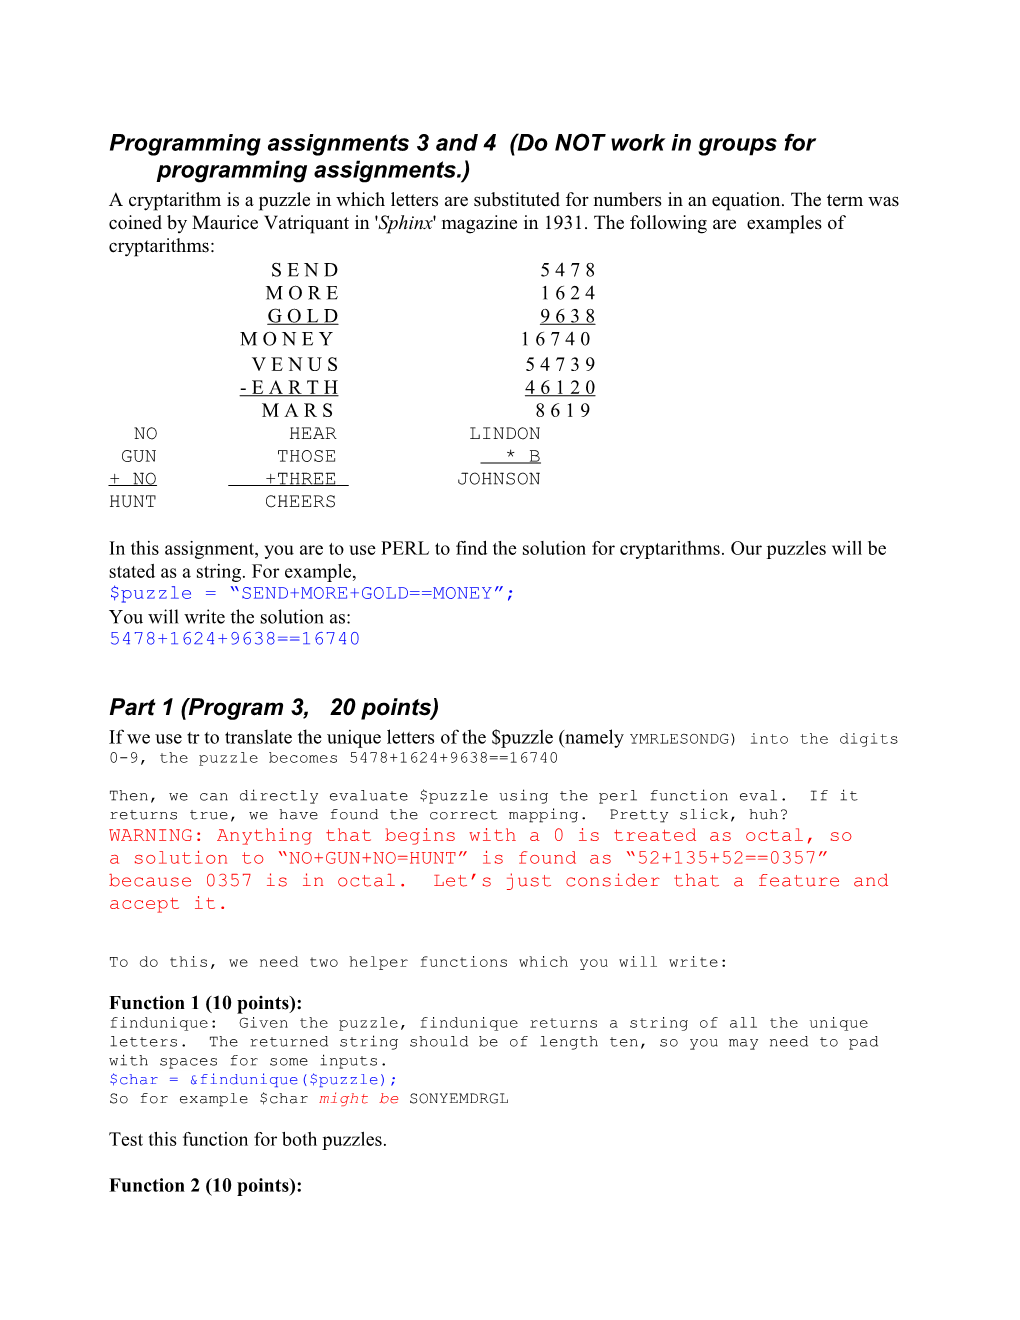 Programming Assignments 3 and 4